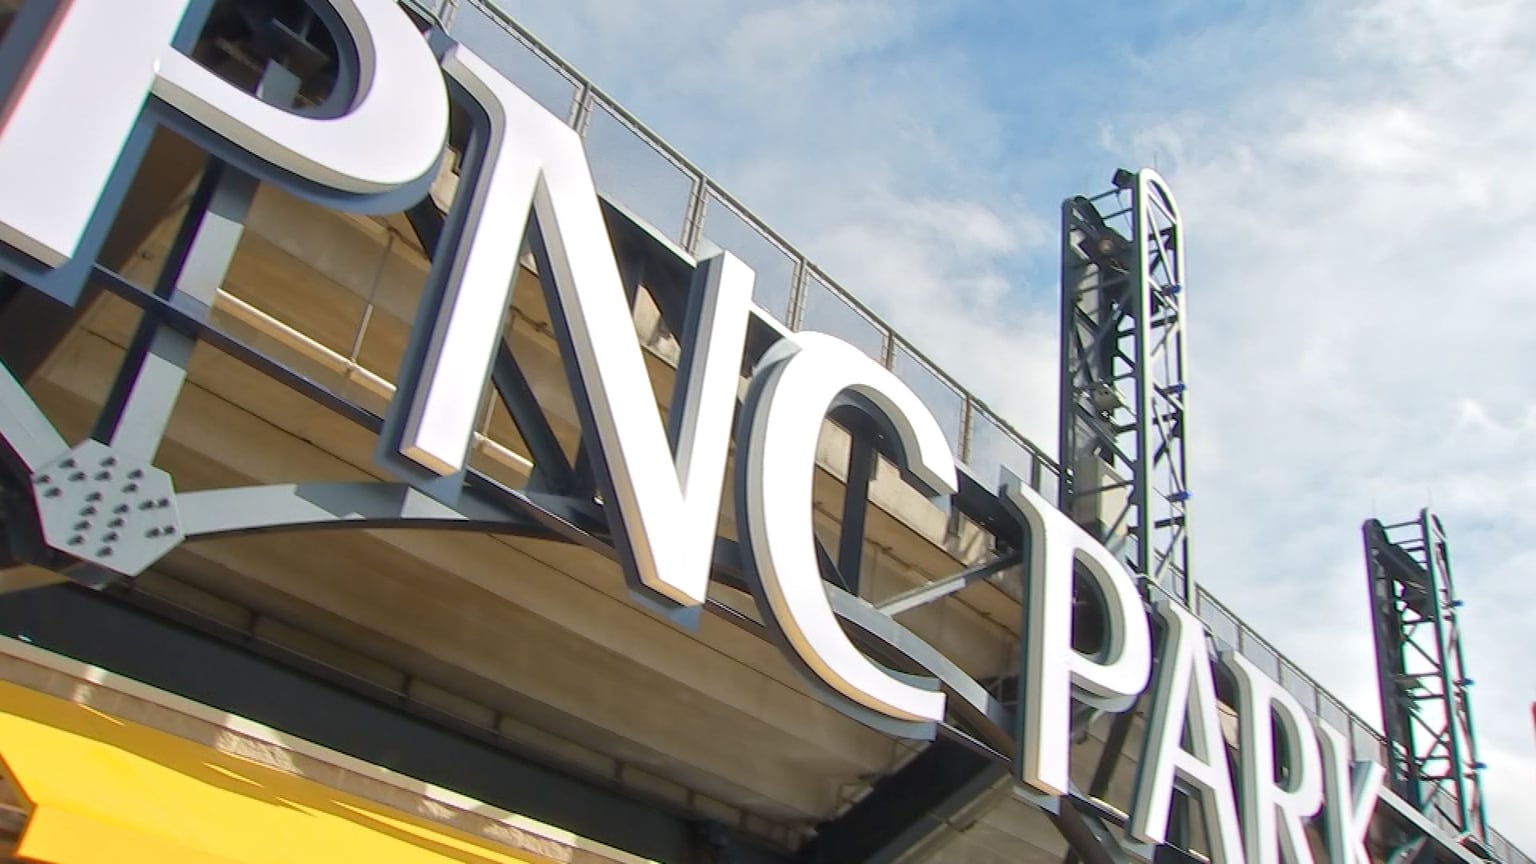 What Are the Big Upgrades Coming to PNC Park This Season?